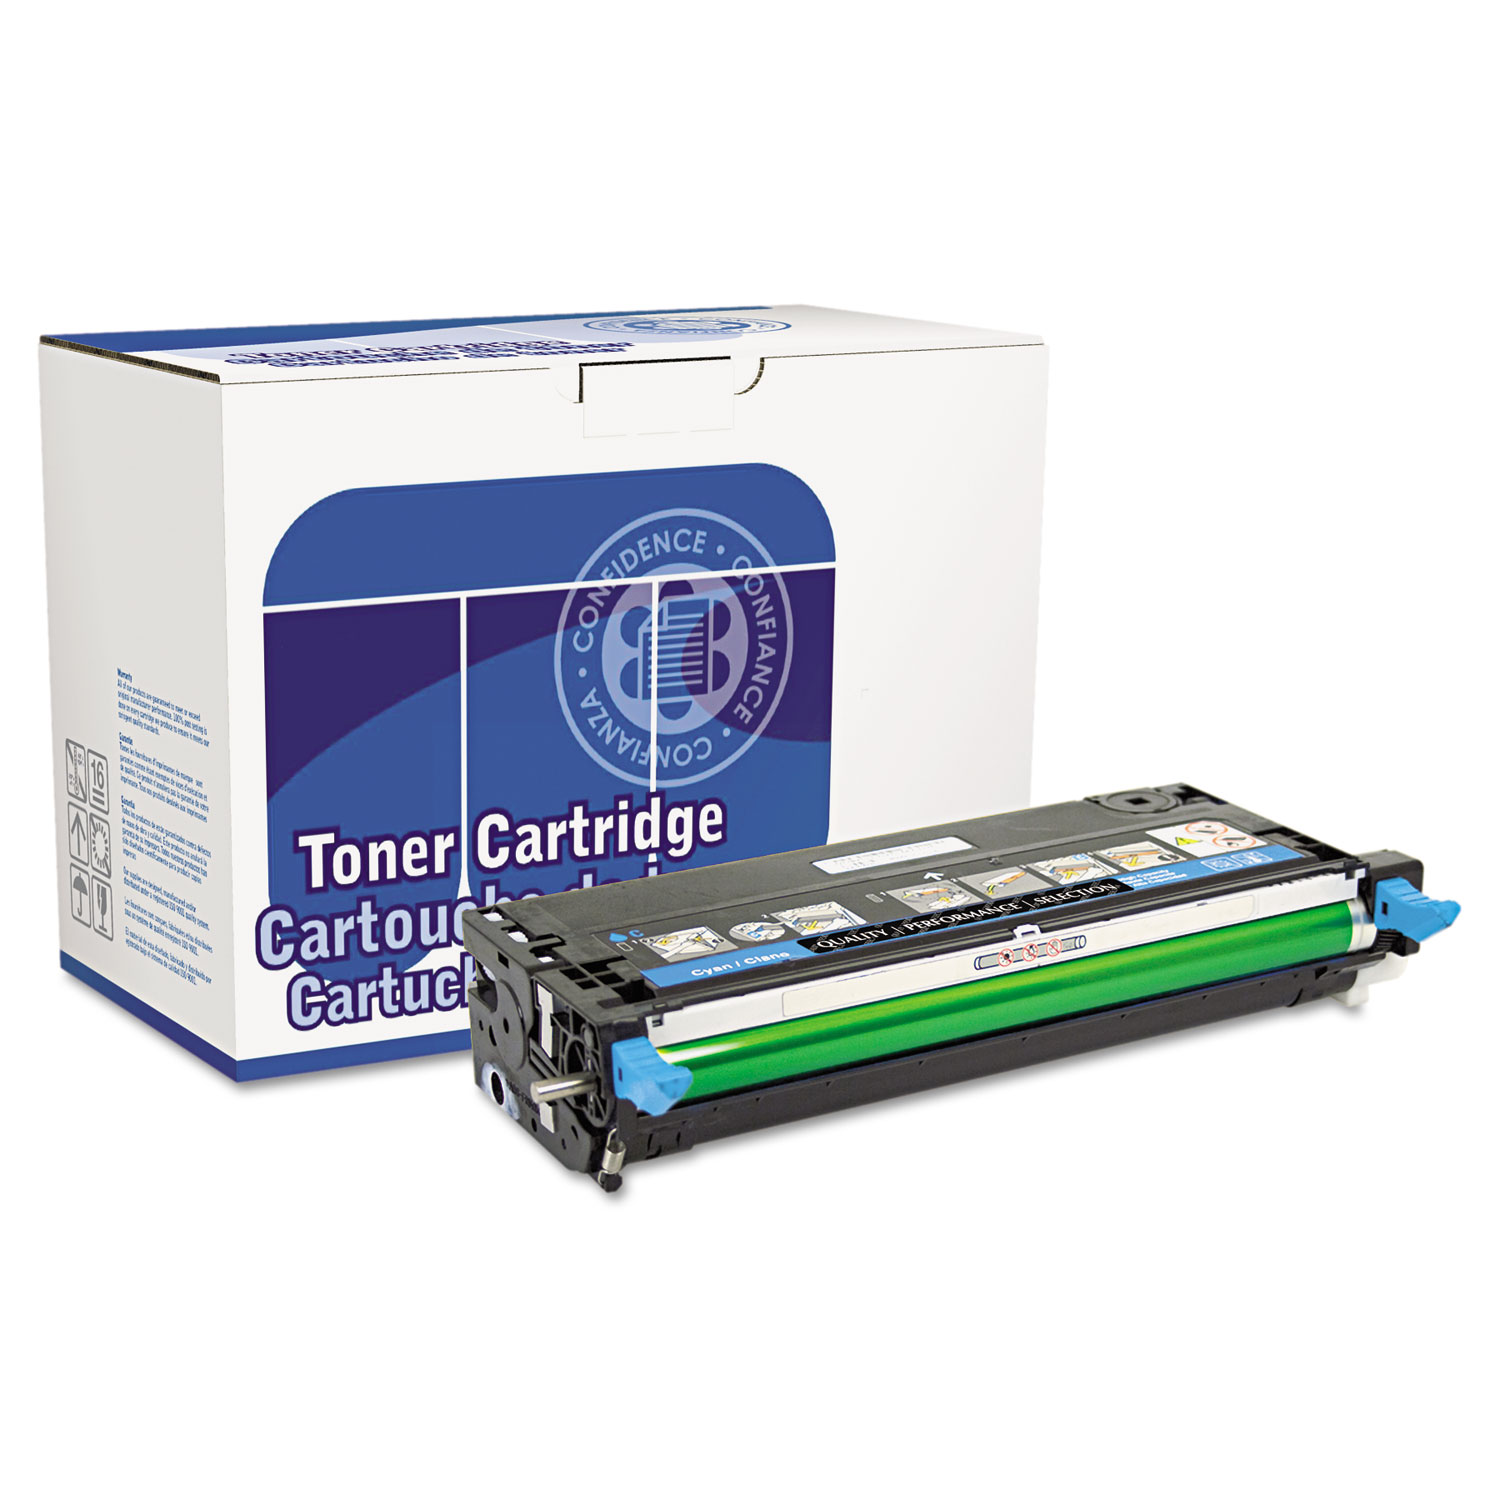 Remanufactured 310-8397 (3115C) High-Yield Toner, 8,000 Page-Yield, Cyan